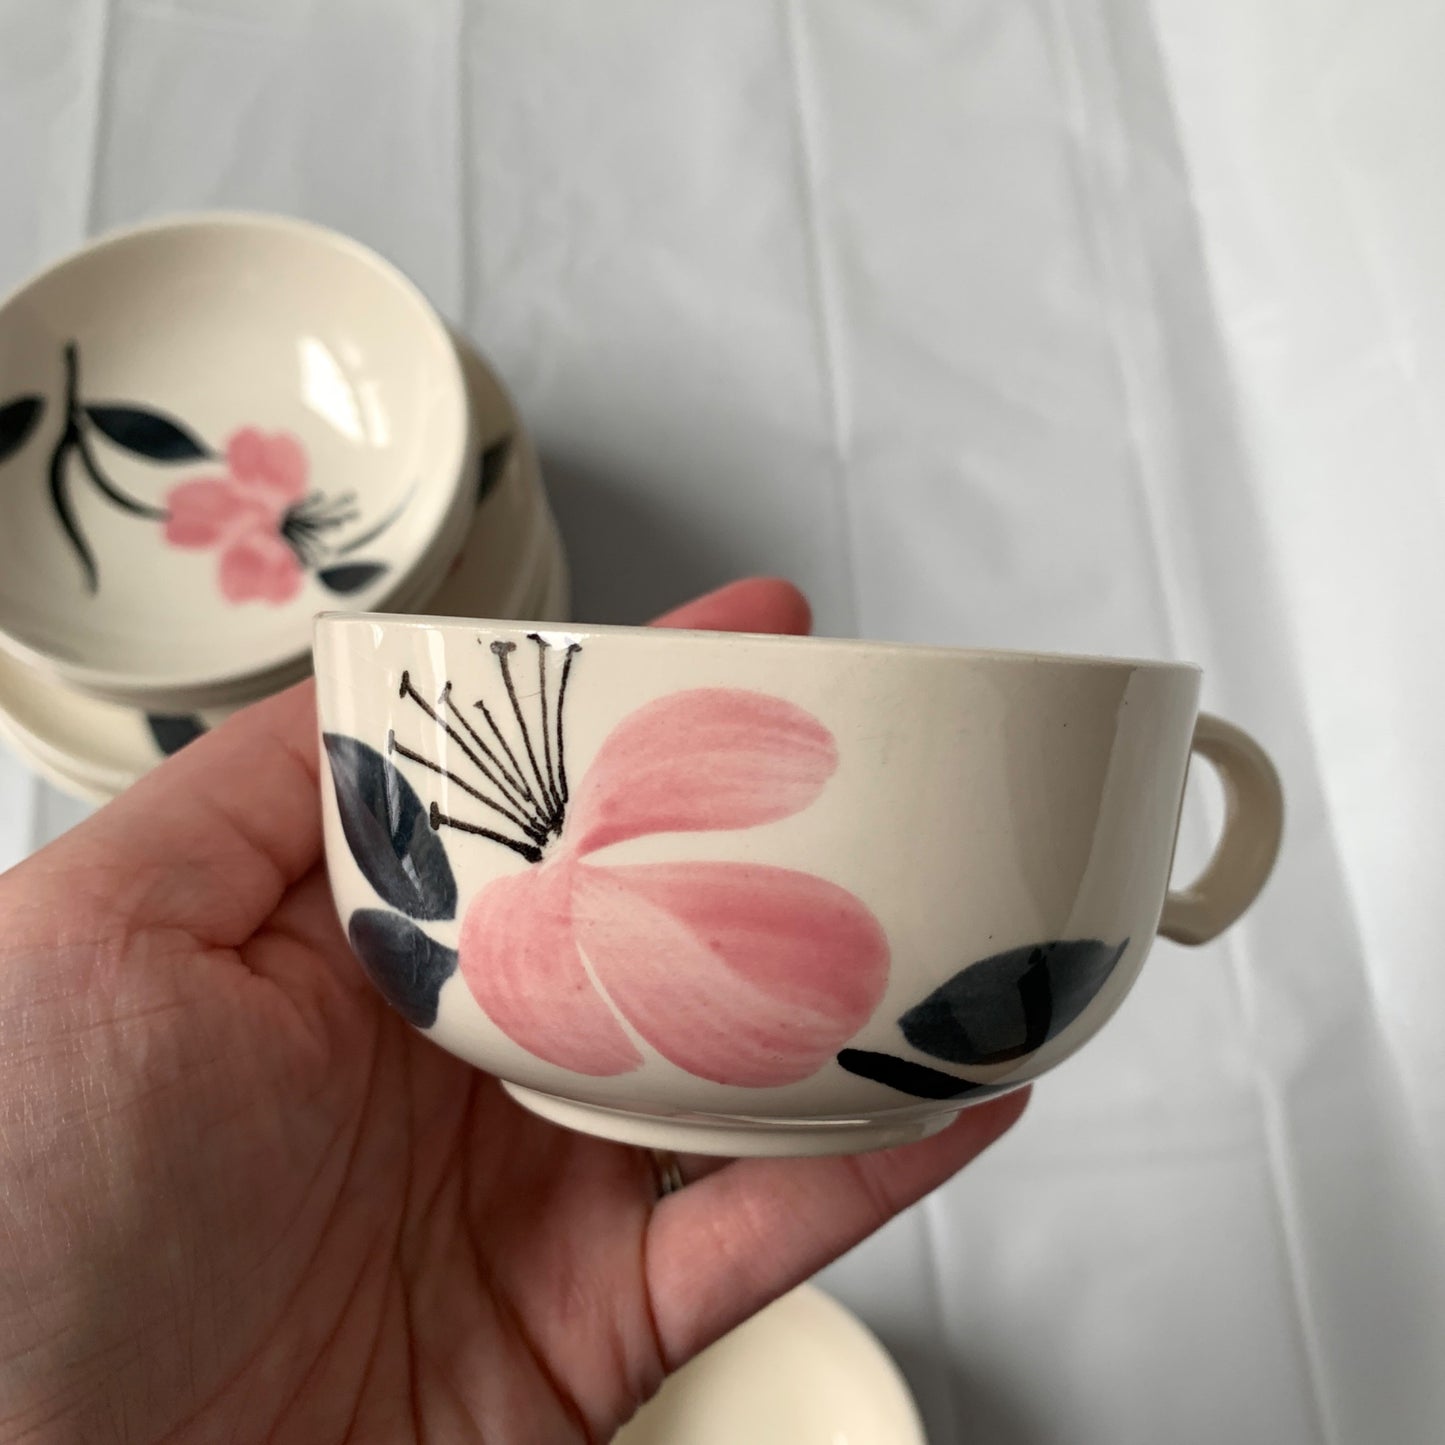 Vintage Unmarked Handpainted White Pink Floral Leaves Cups Saucers Small Plates Set